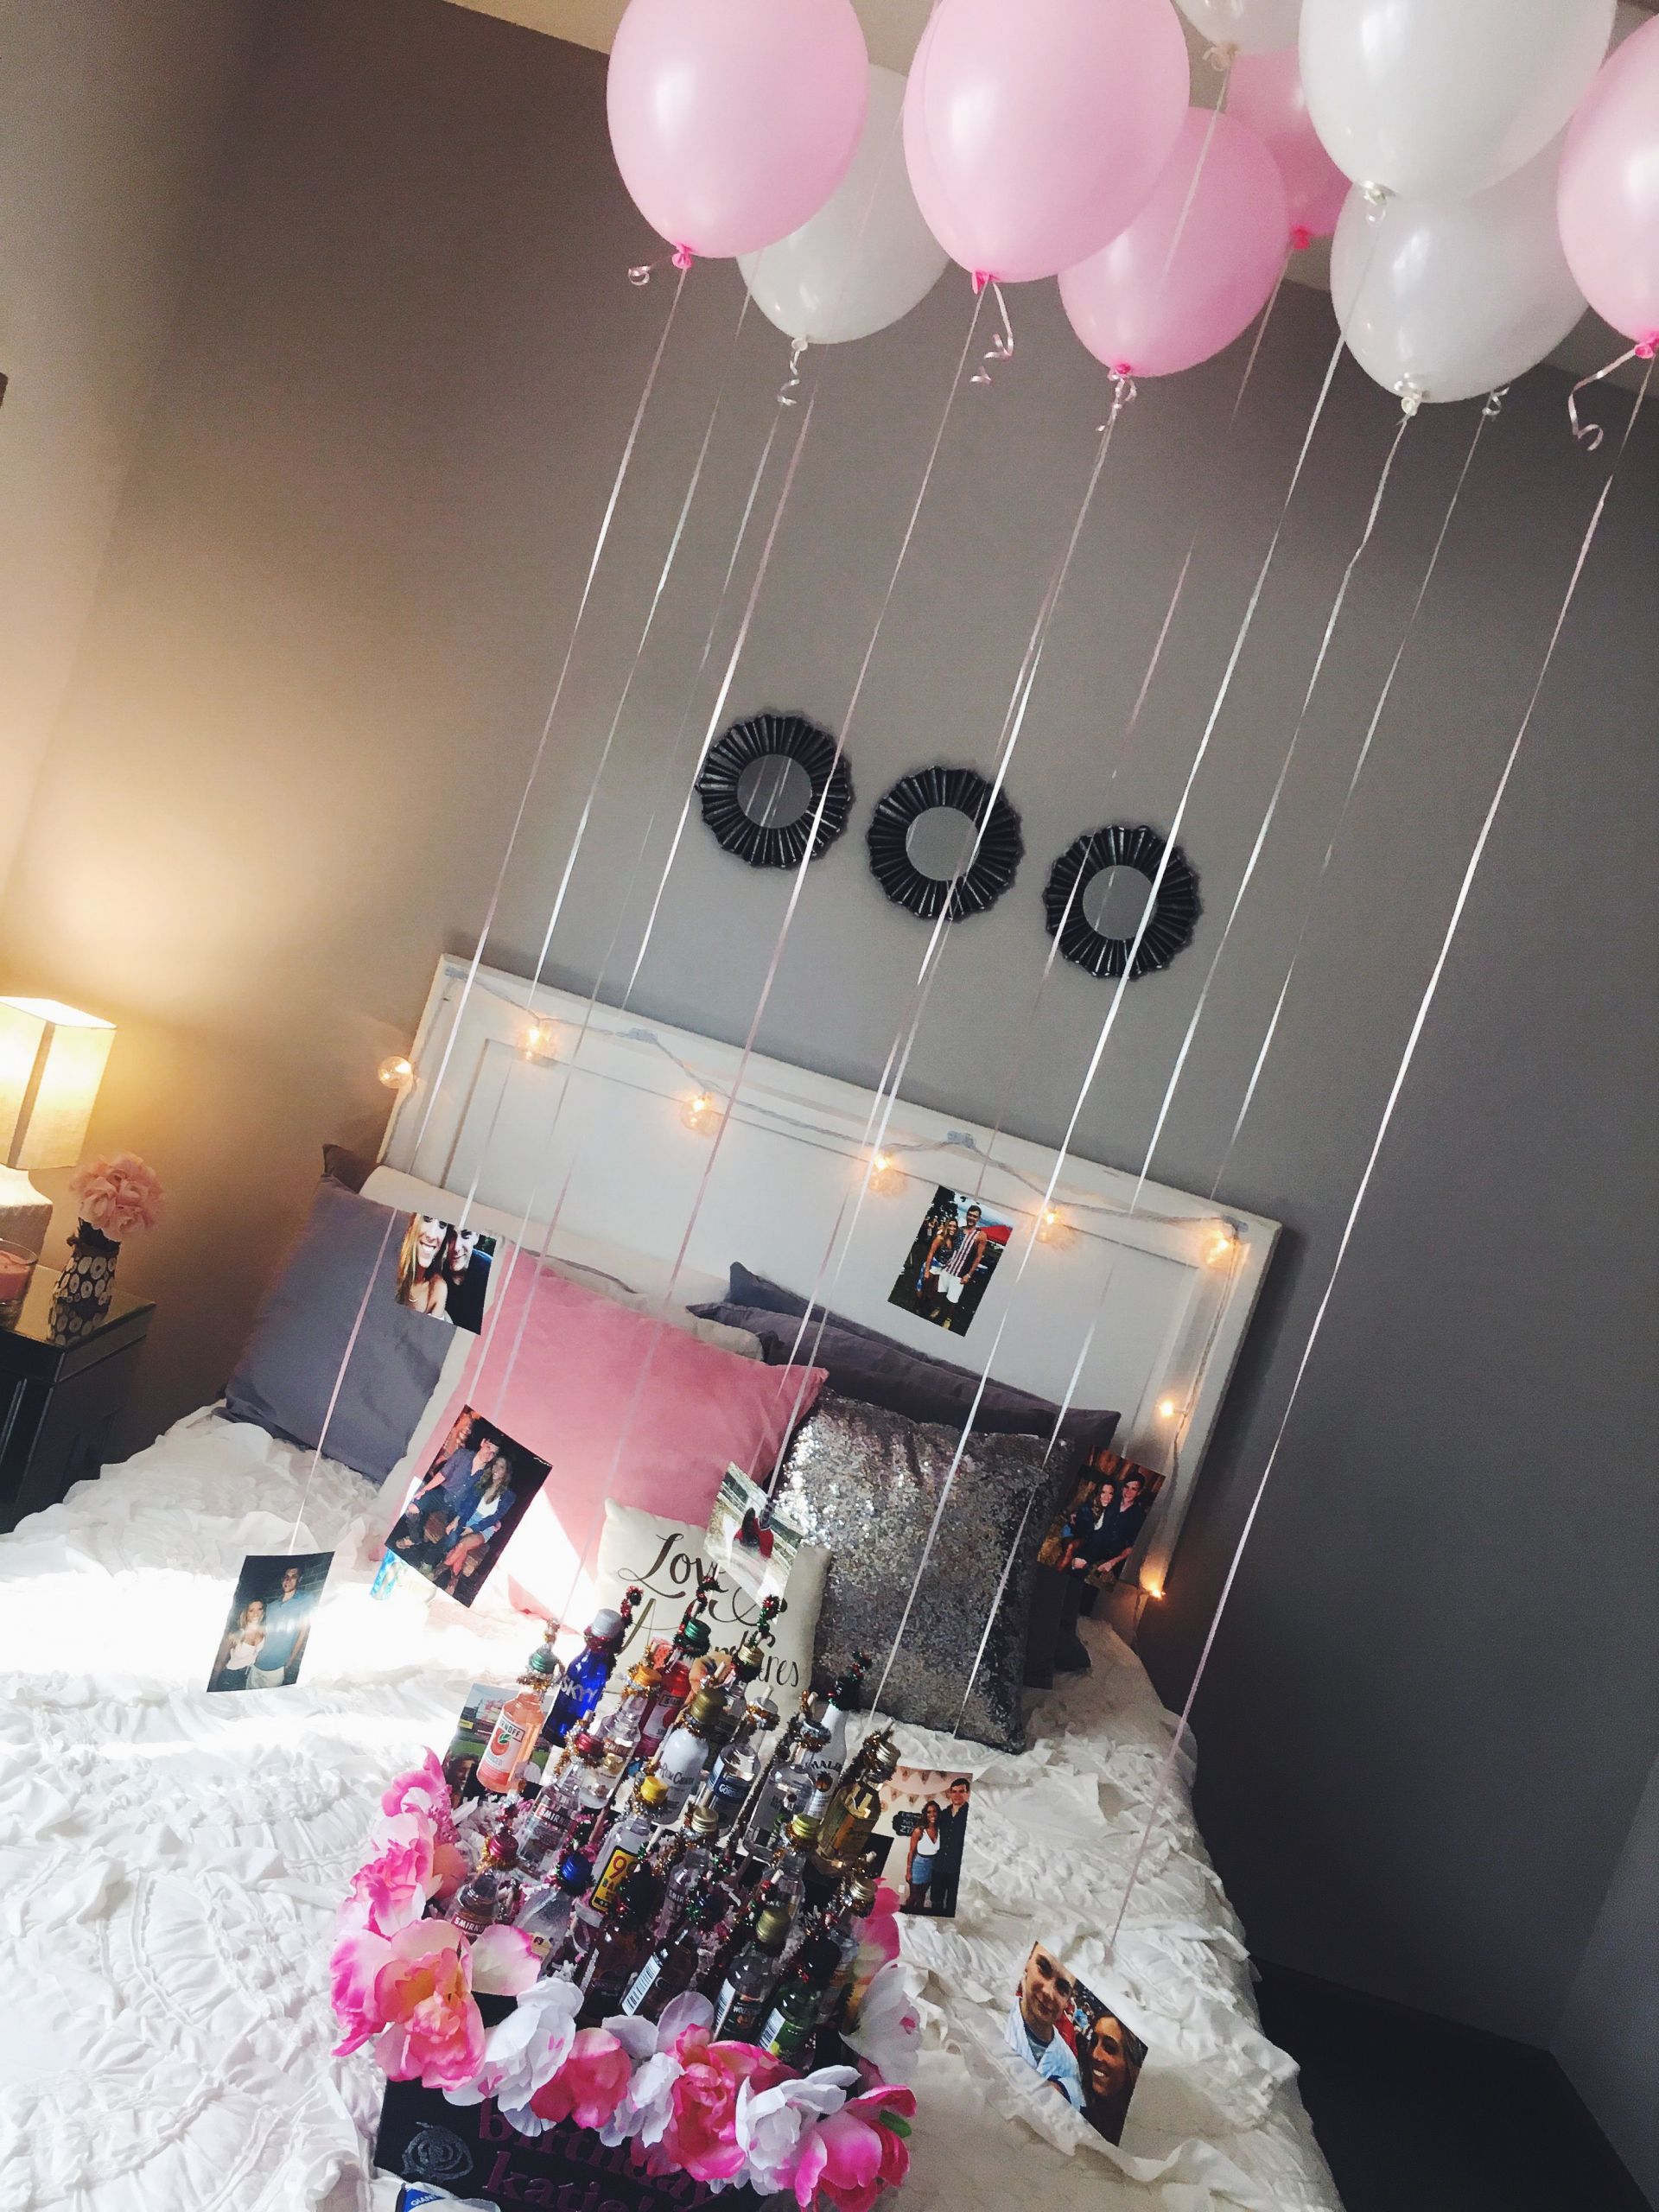 Cute Gift Ideas For Girlfriend
 easy and cute decorations for a friend or girlfriends 21st